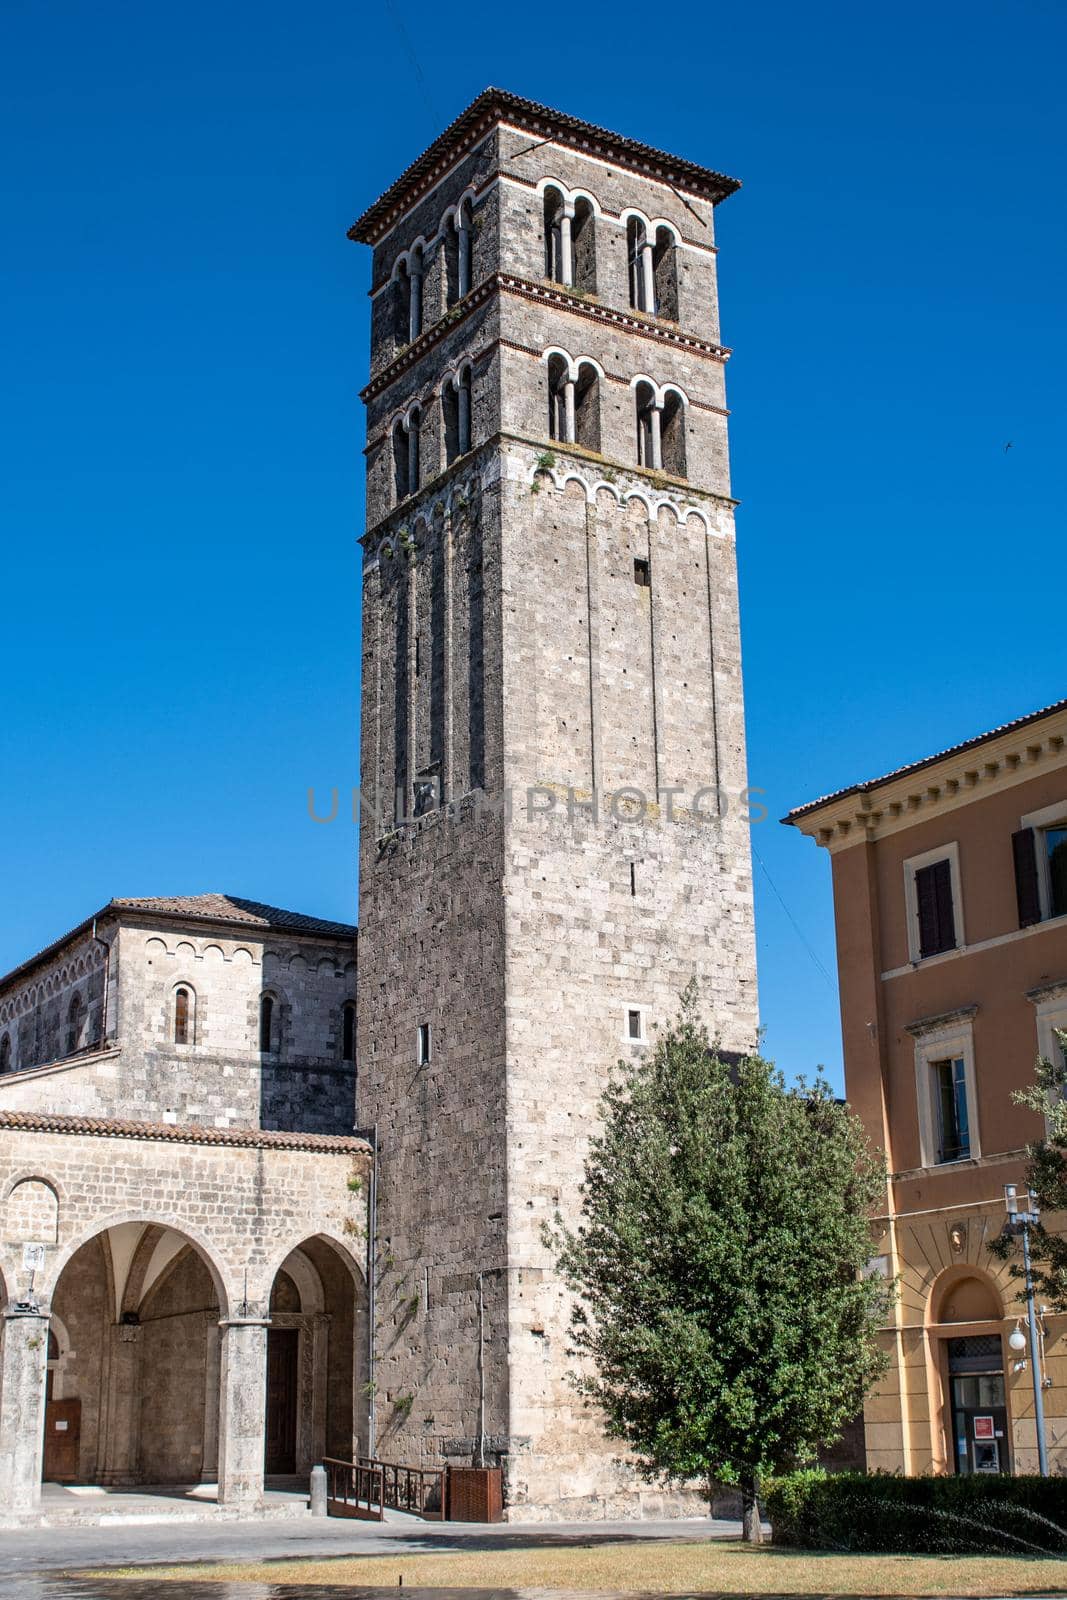 rieti cathedral of santa maria in the historic center by carfedeph